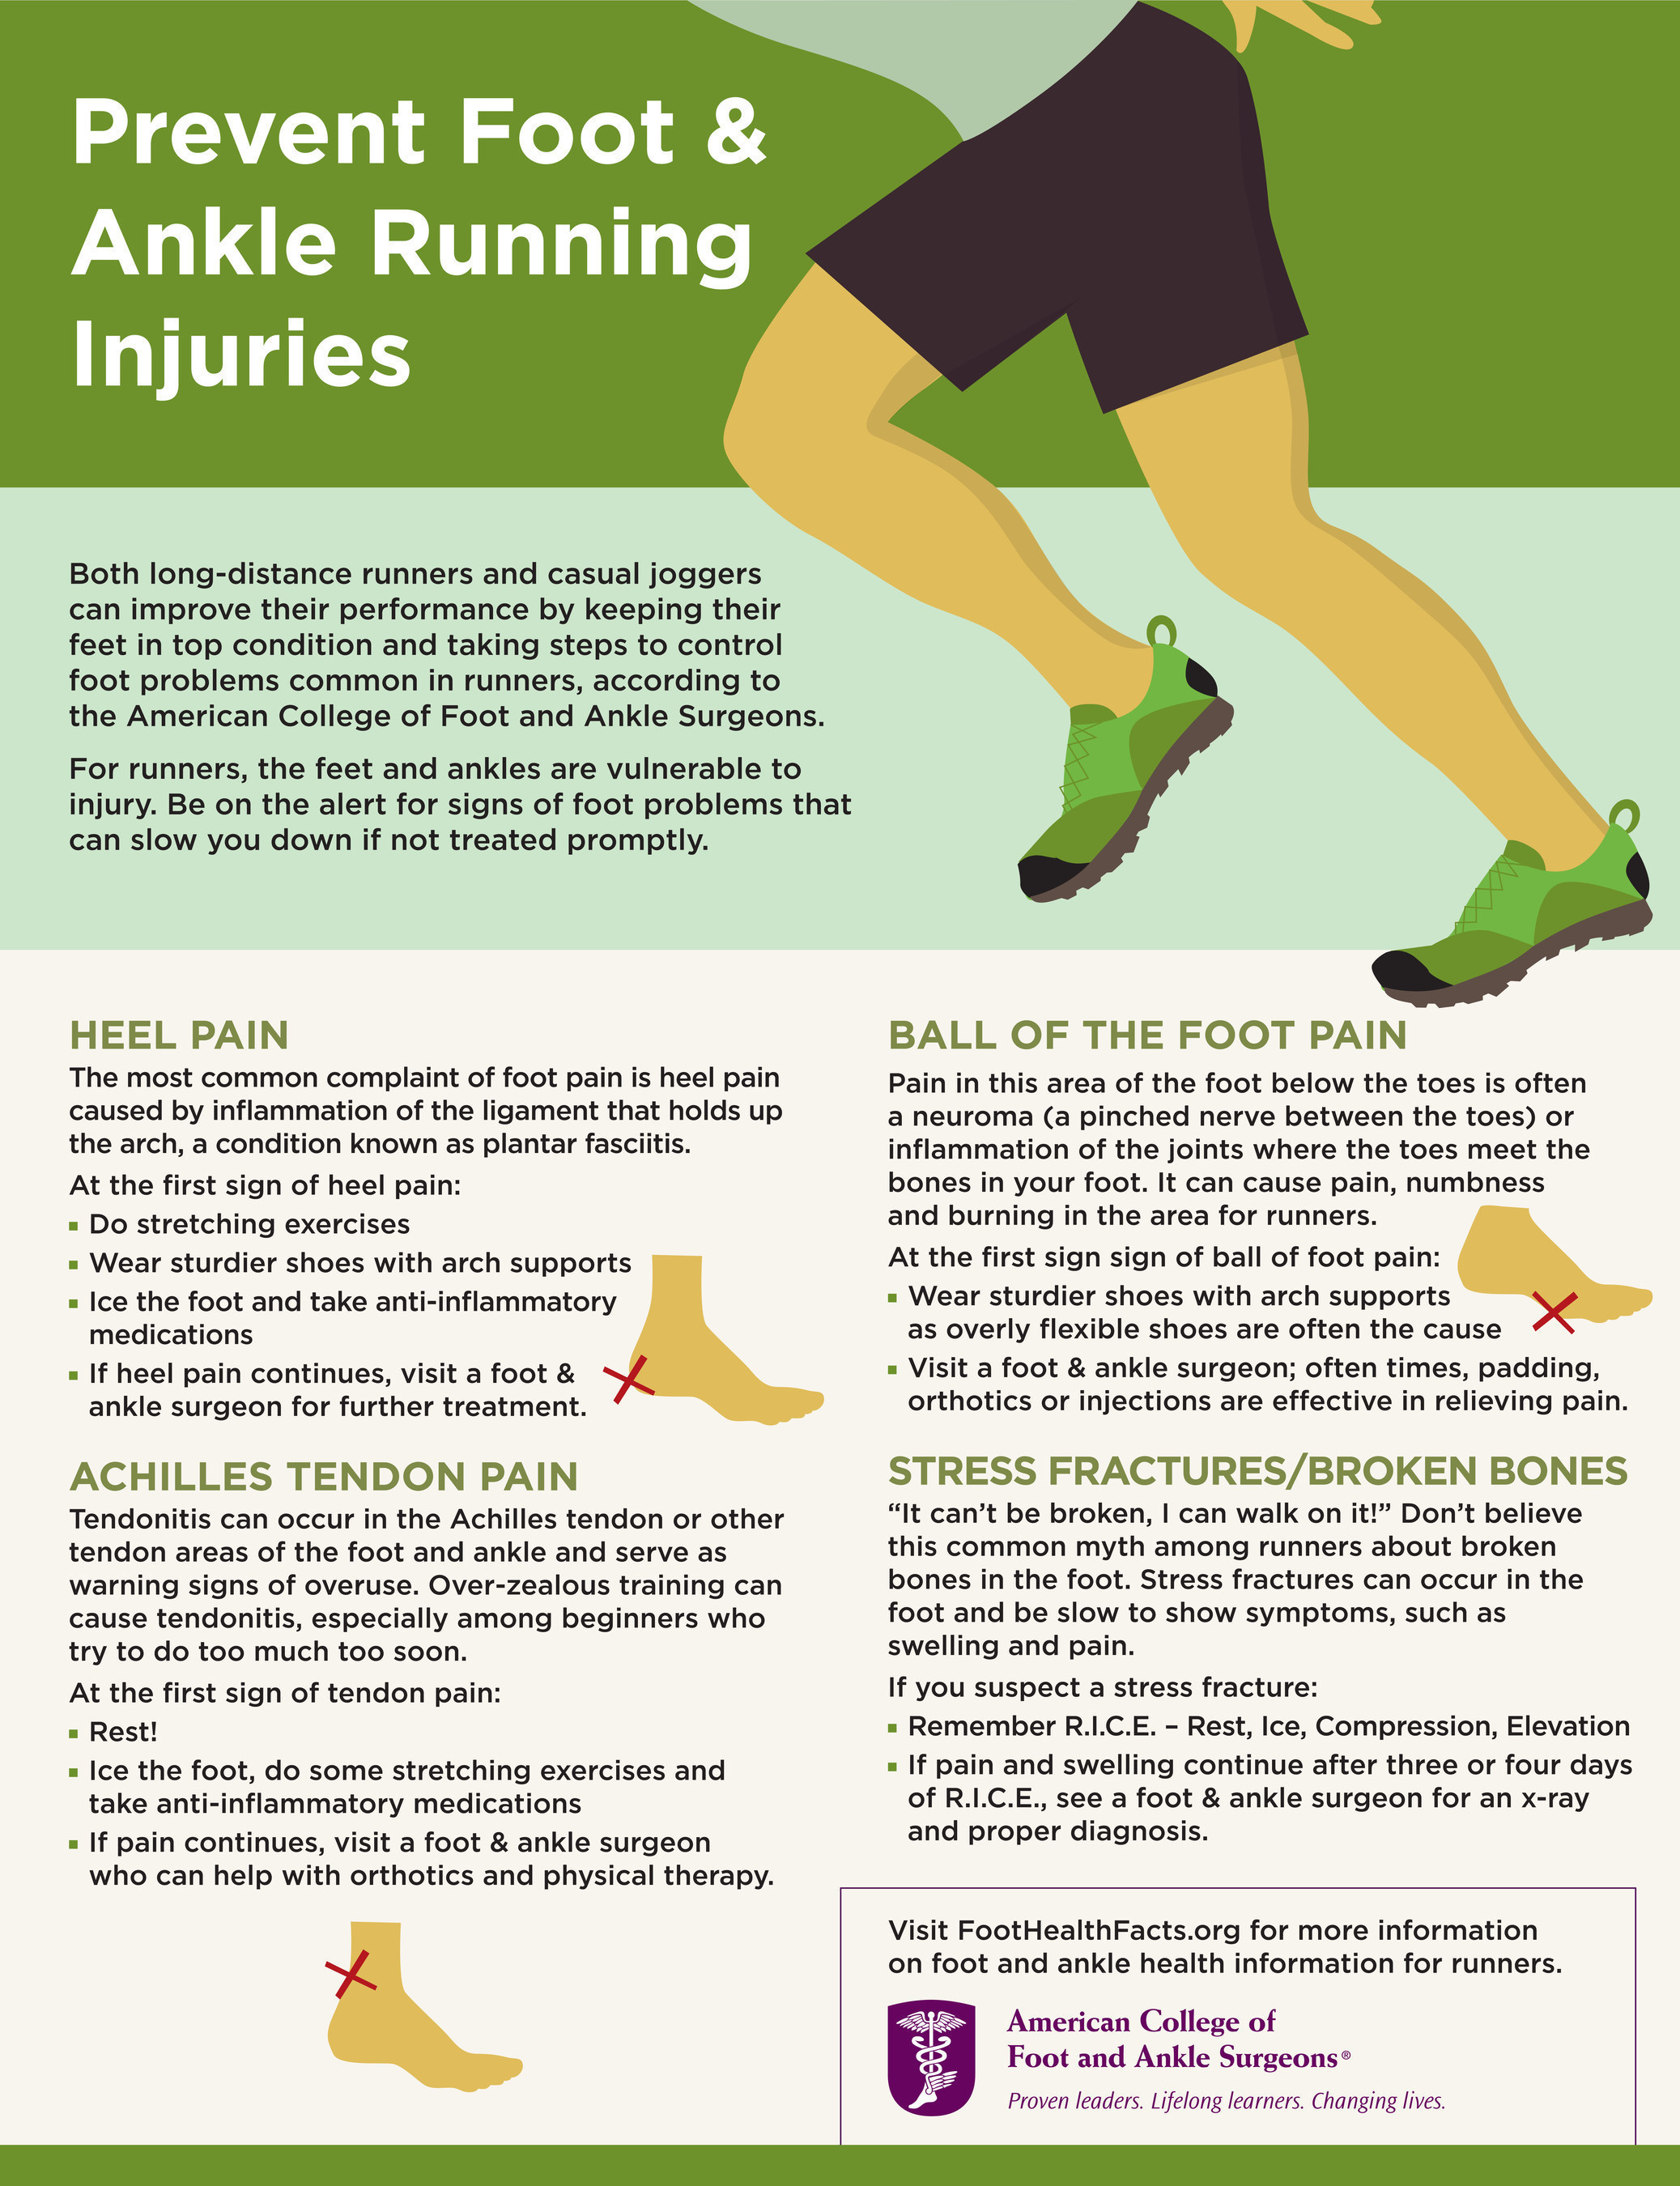 Austin Marathon Runners: Fit Feet Finish Faster - Foot & Ankle Surgeons Offer Tips to Prevent Injuries.